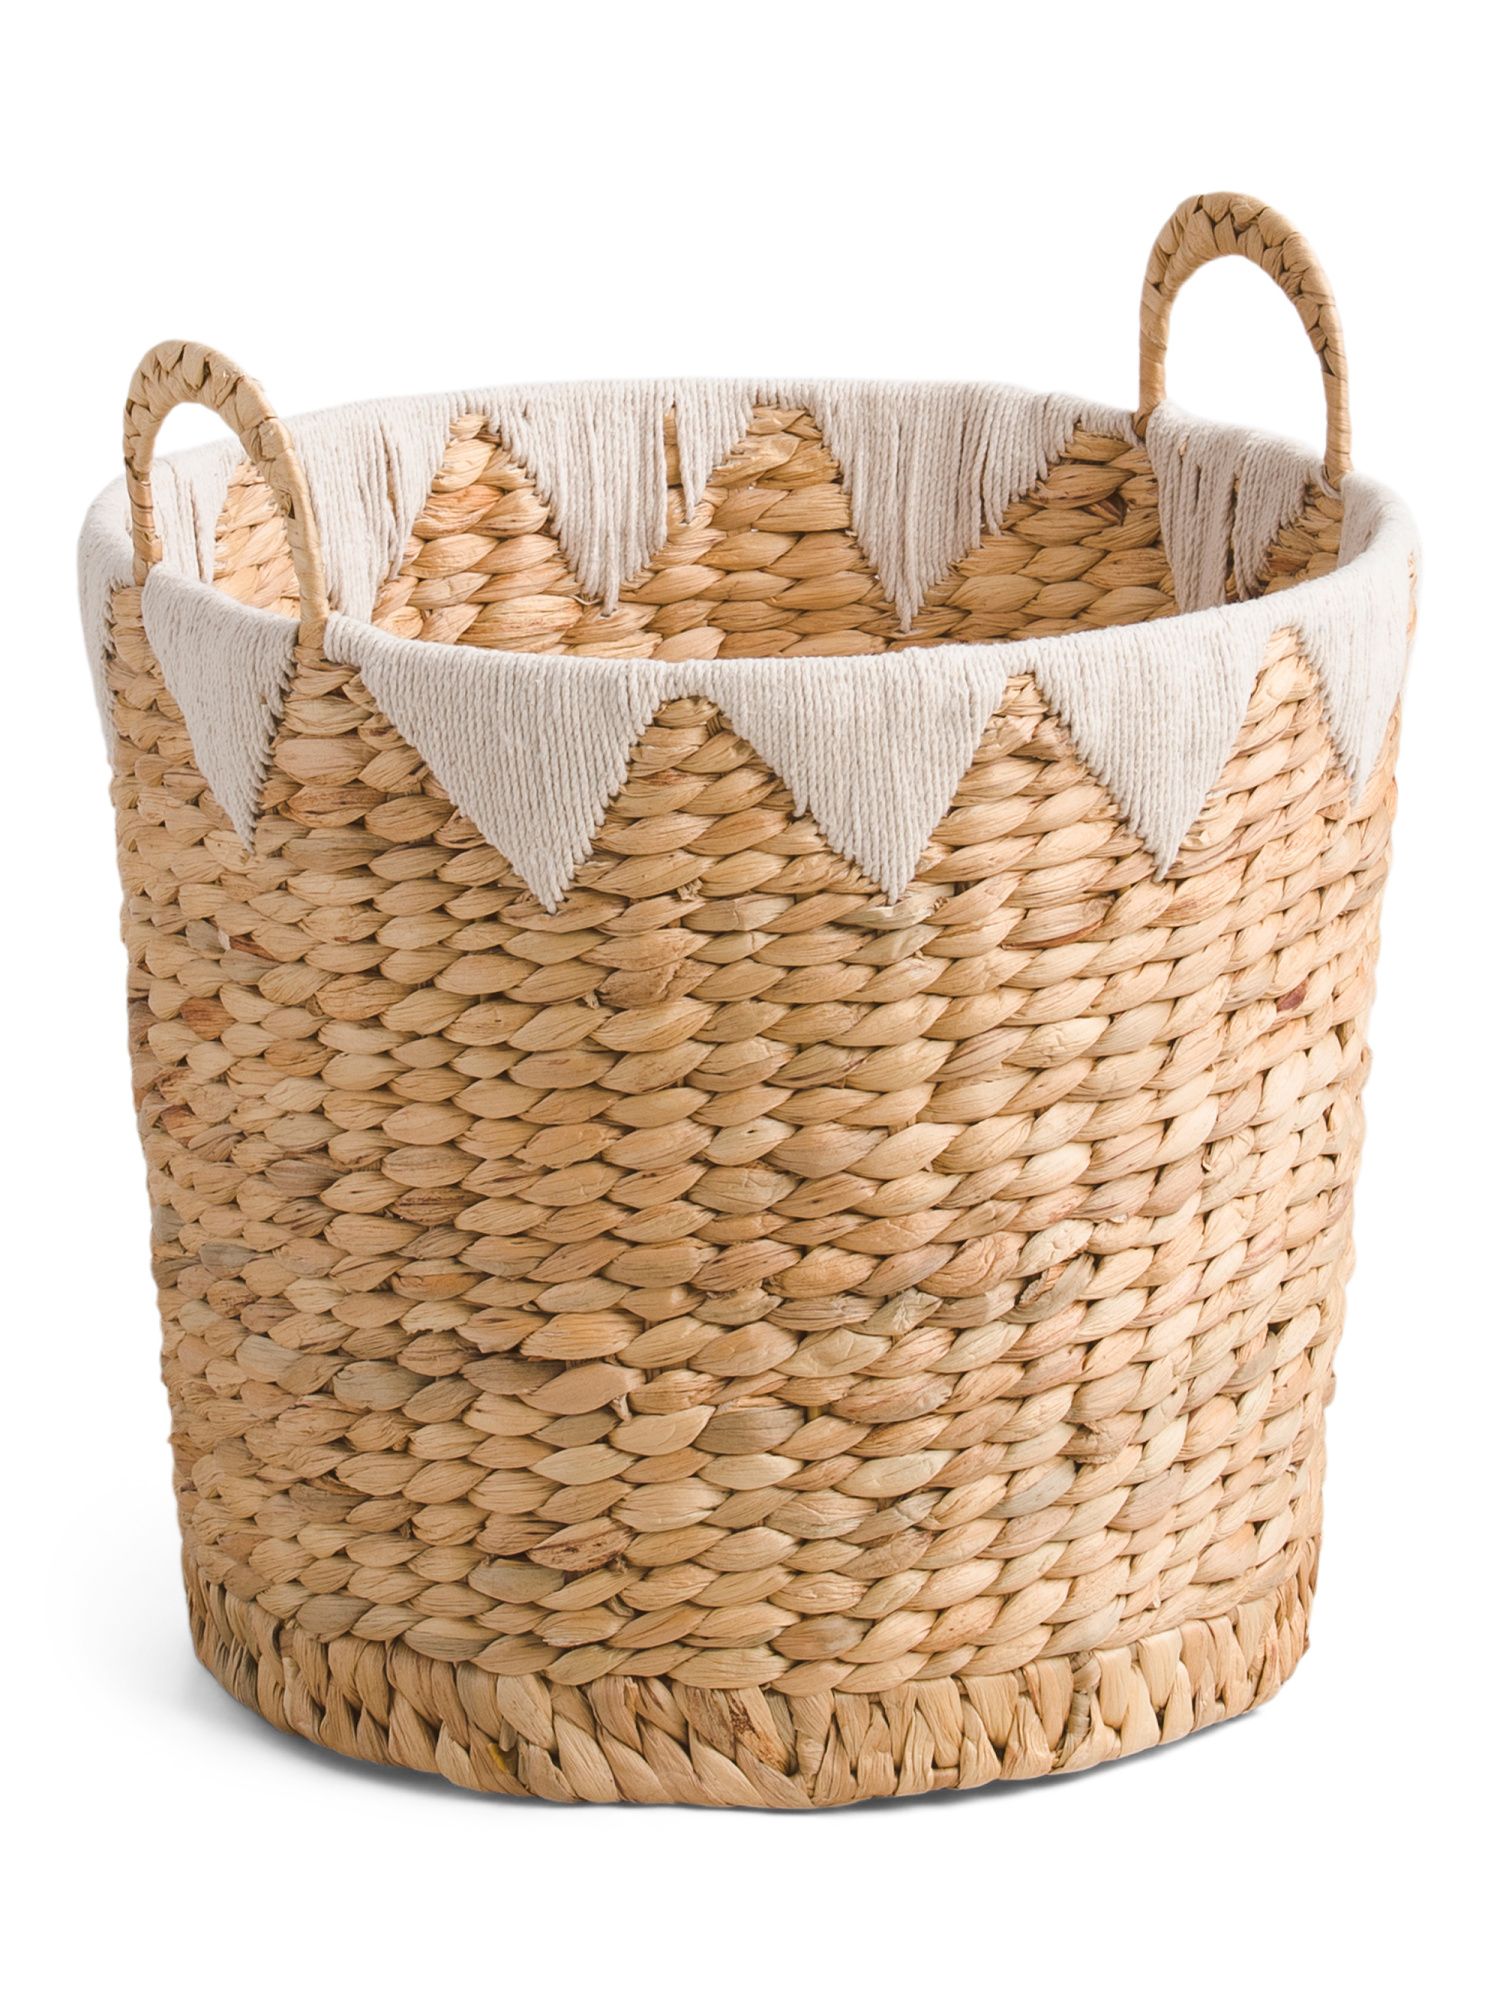 Small Round Basket With Yarn Top Detail | TJ Maxx